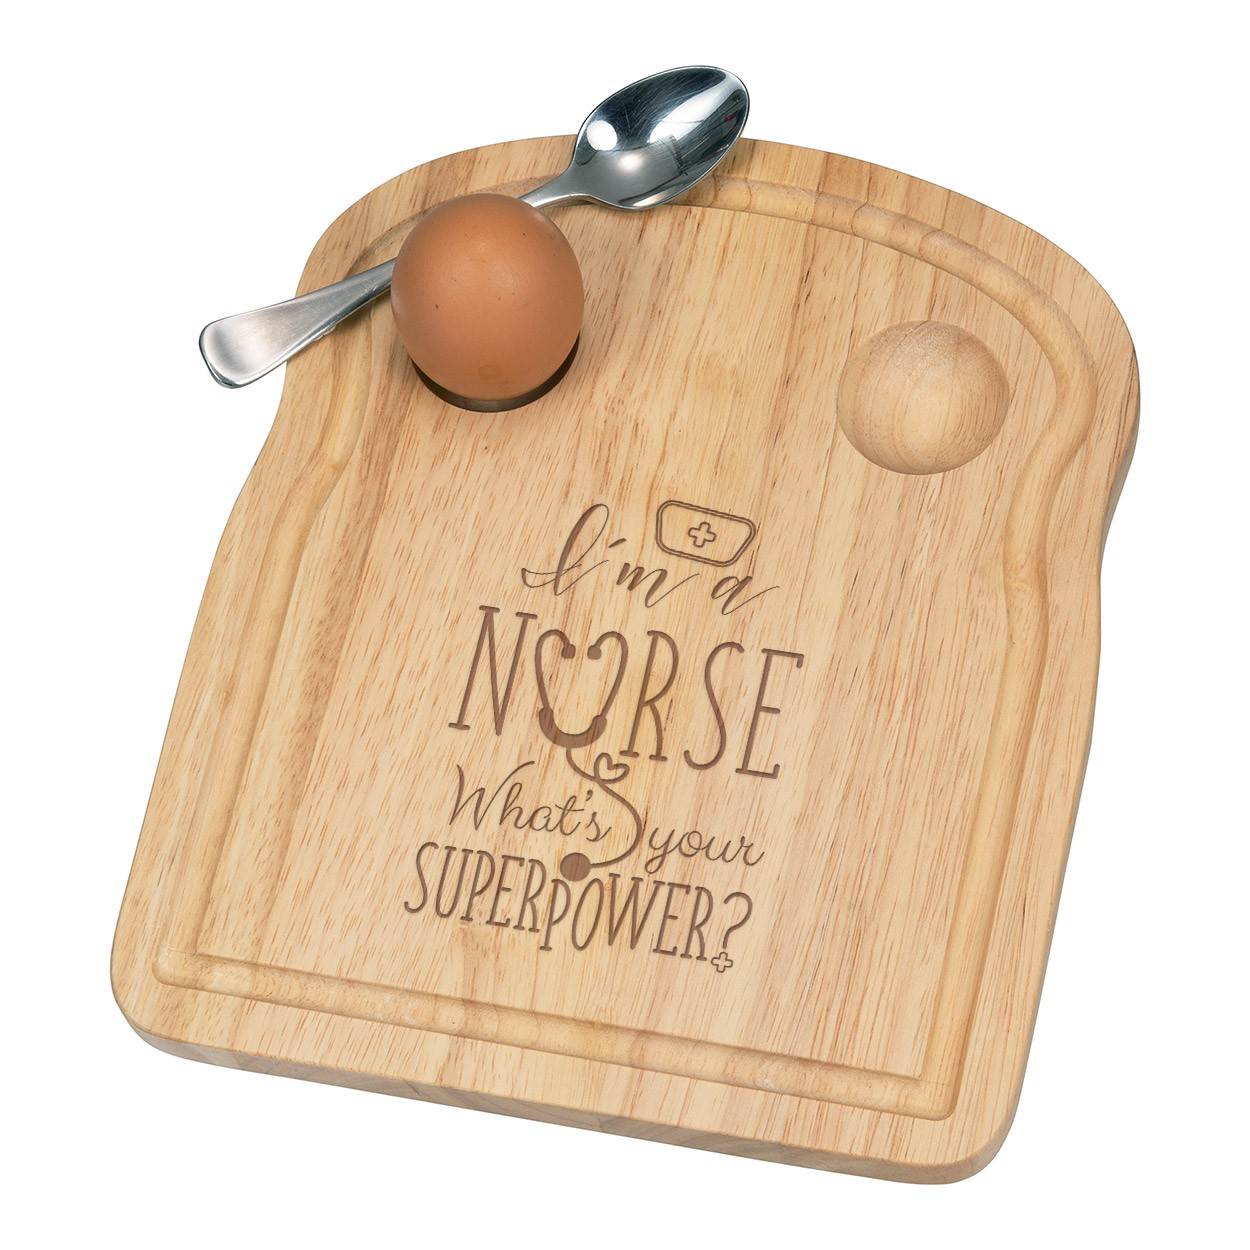 I'm A Nurse What's Your Superpower Breakfast Dippy Egg Cup Board Wooden